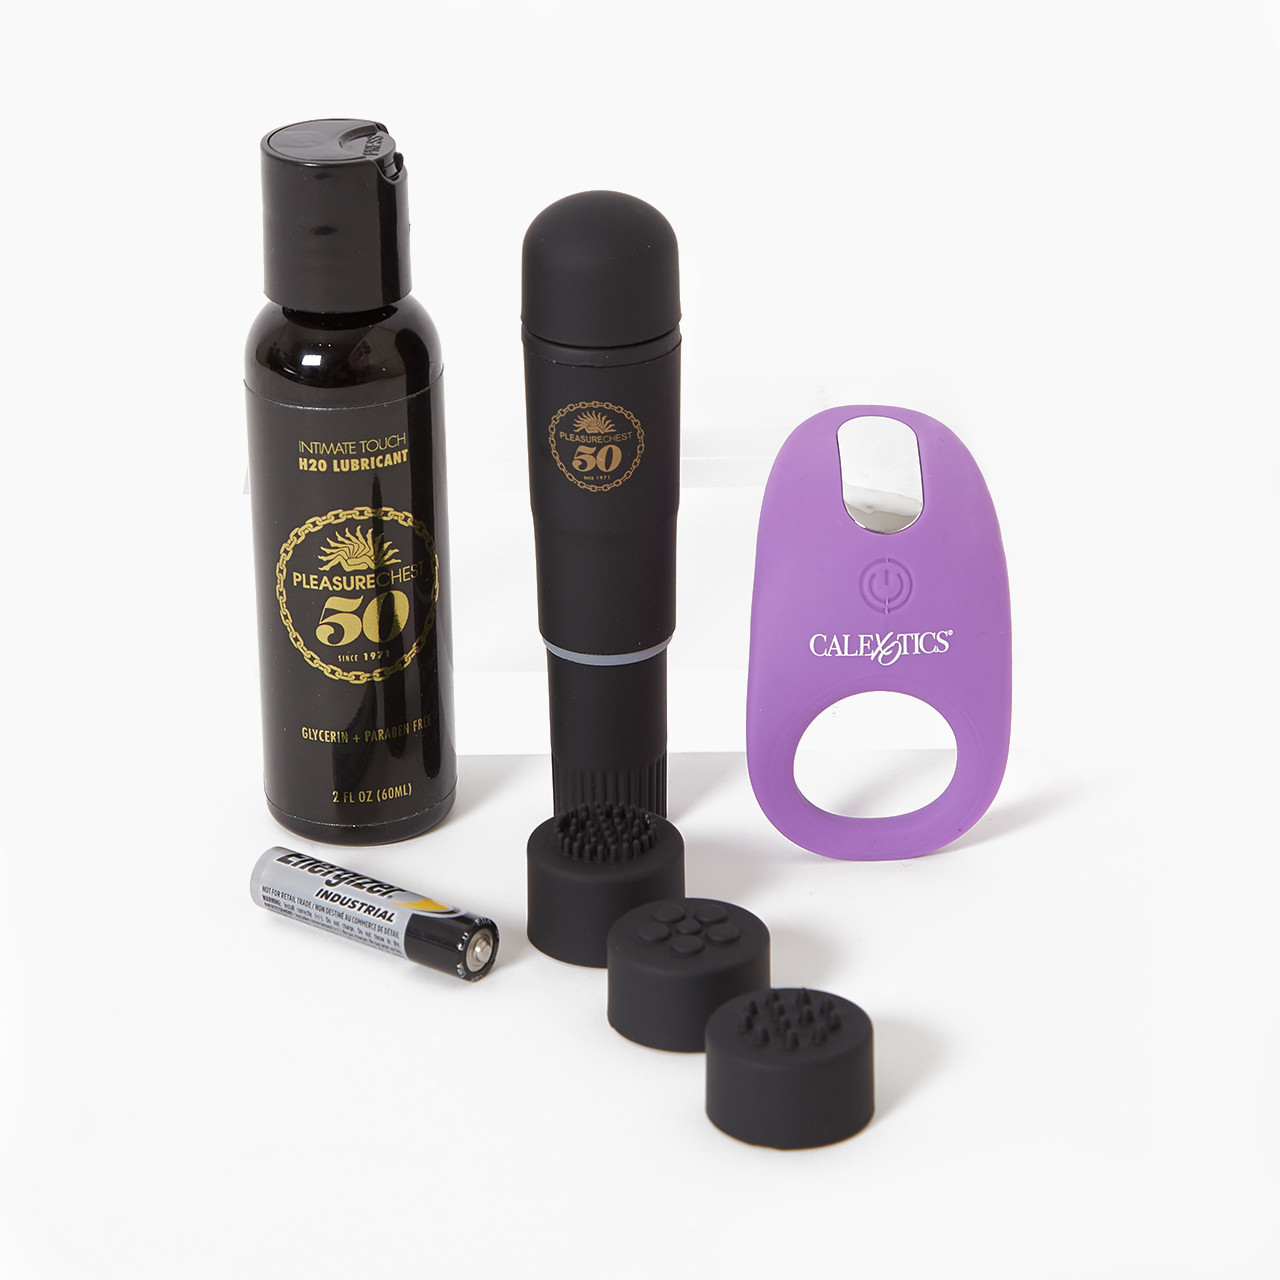 Only the Essentials Sex Toy Kit with vibrating ring, bullet vibrator and water-based lube